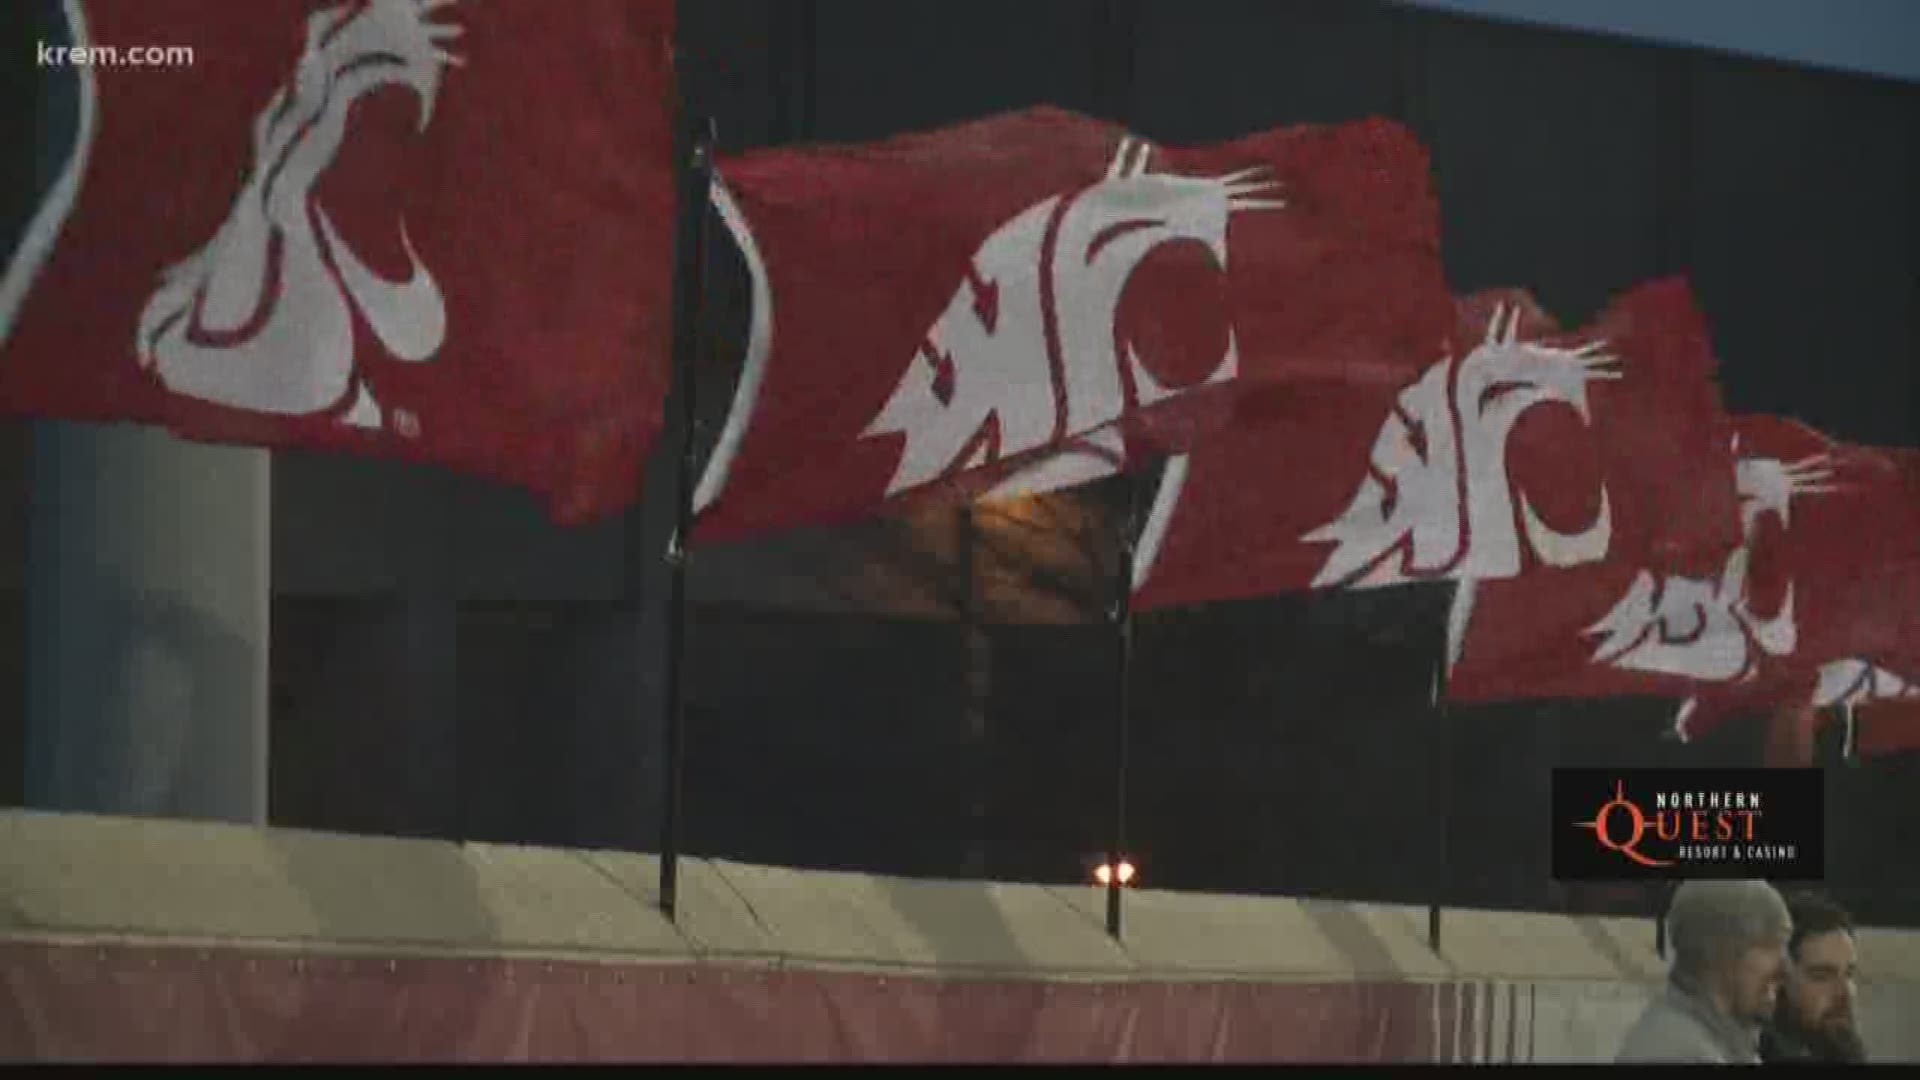 WSU topped Gonzaga 4-3 thanks to Robert Teel's first home run as a Coug. (4-3-2018)